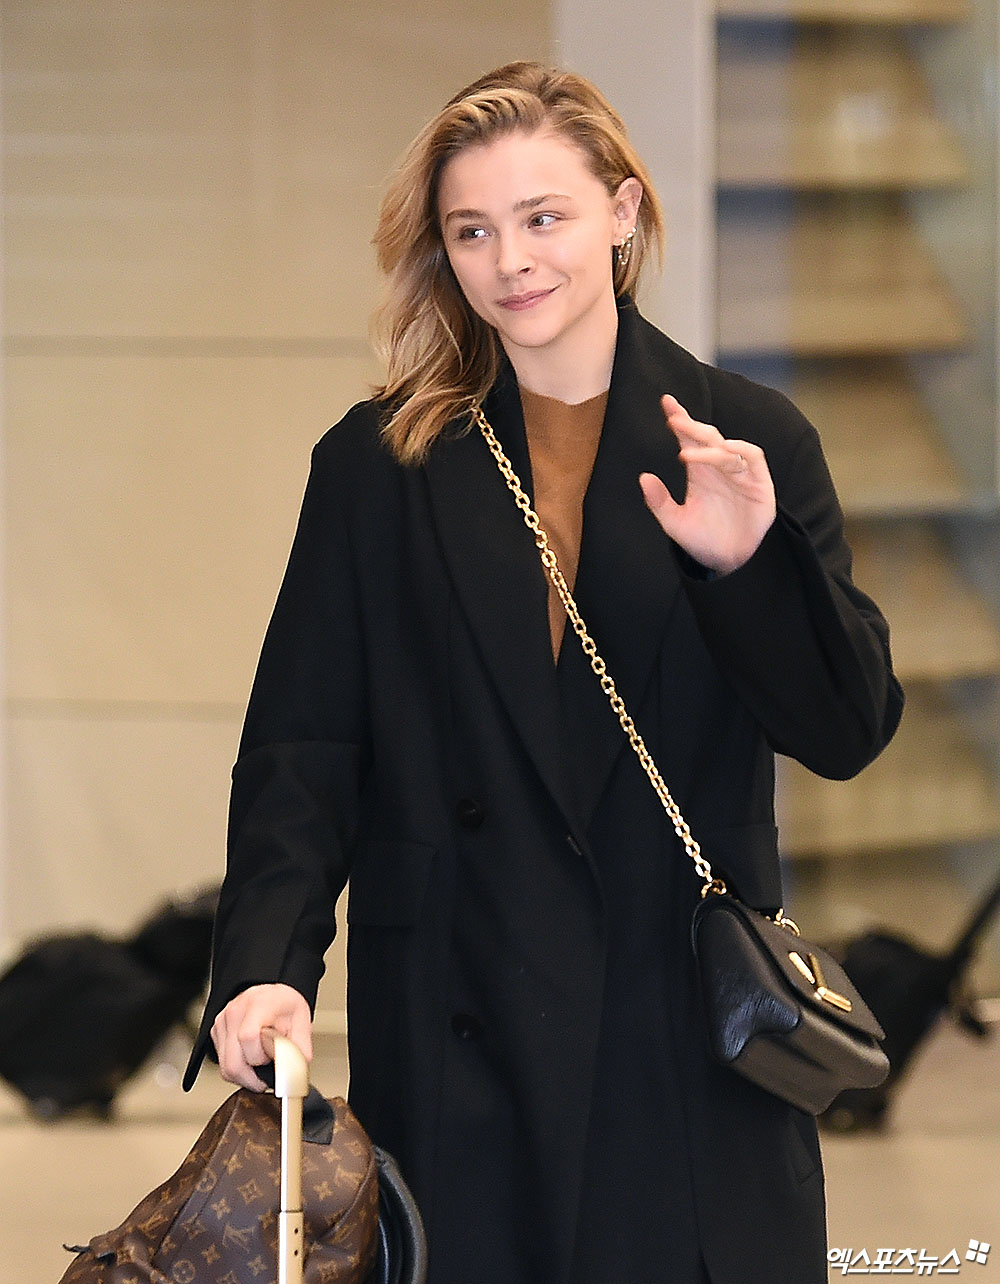 United States of America Actor Chloe Moretz entered the country via the International Airport on Friday afternoon.